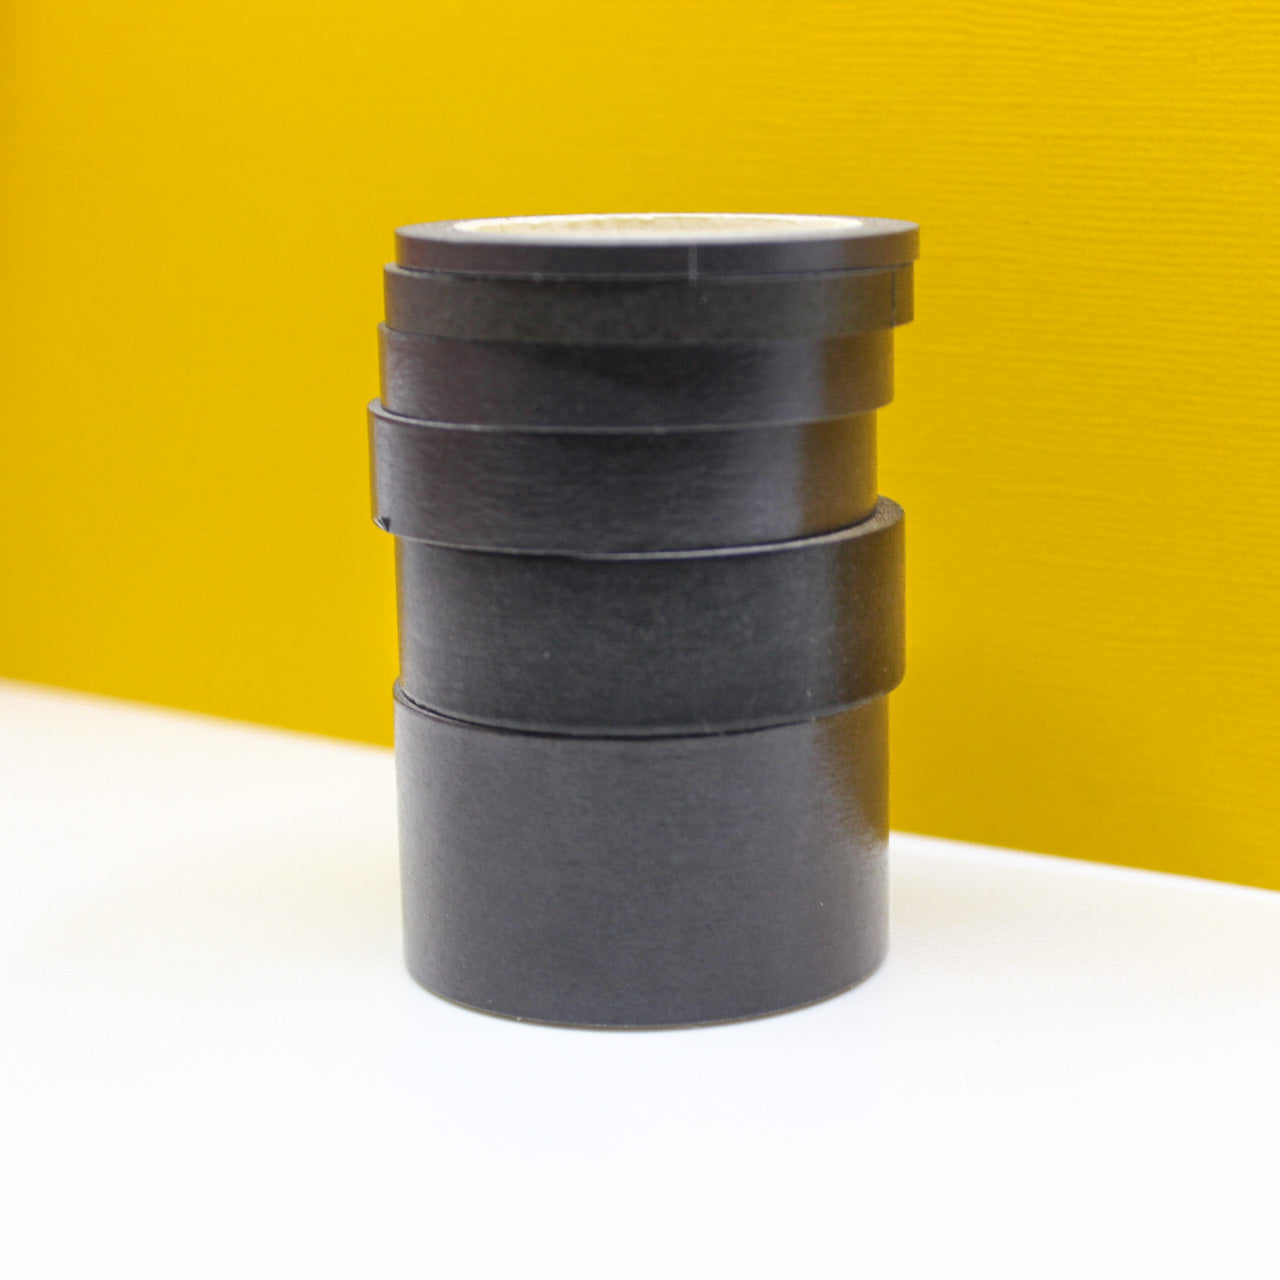 Enhance your crafts with our solid black washi tape, featuring a sleek and versatile design in a classic black hue, perfect for adding depth and contrast to your projects. This tape is sold at BBB Supplies Craft Shop.